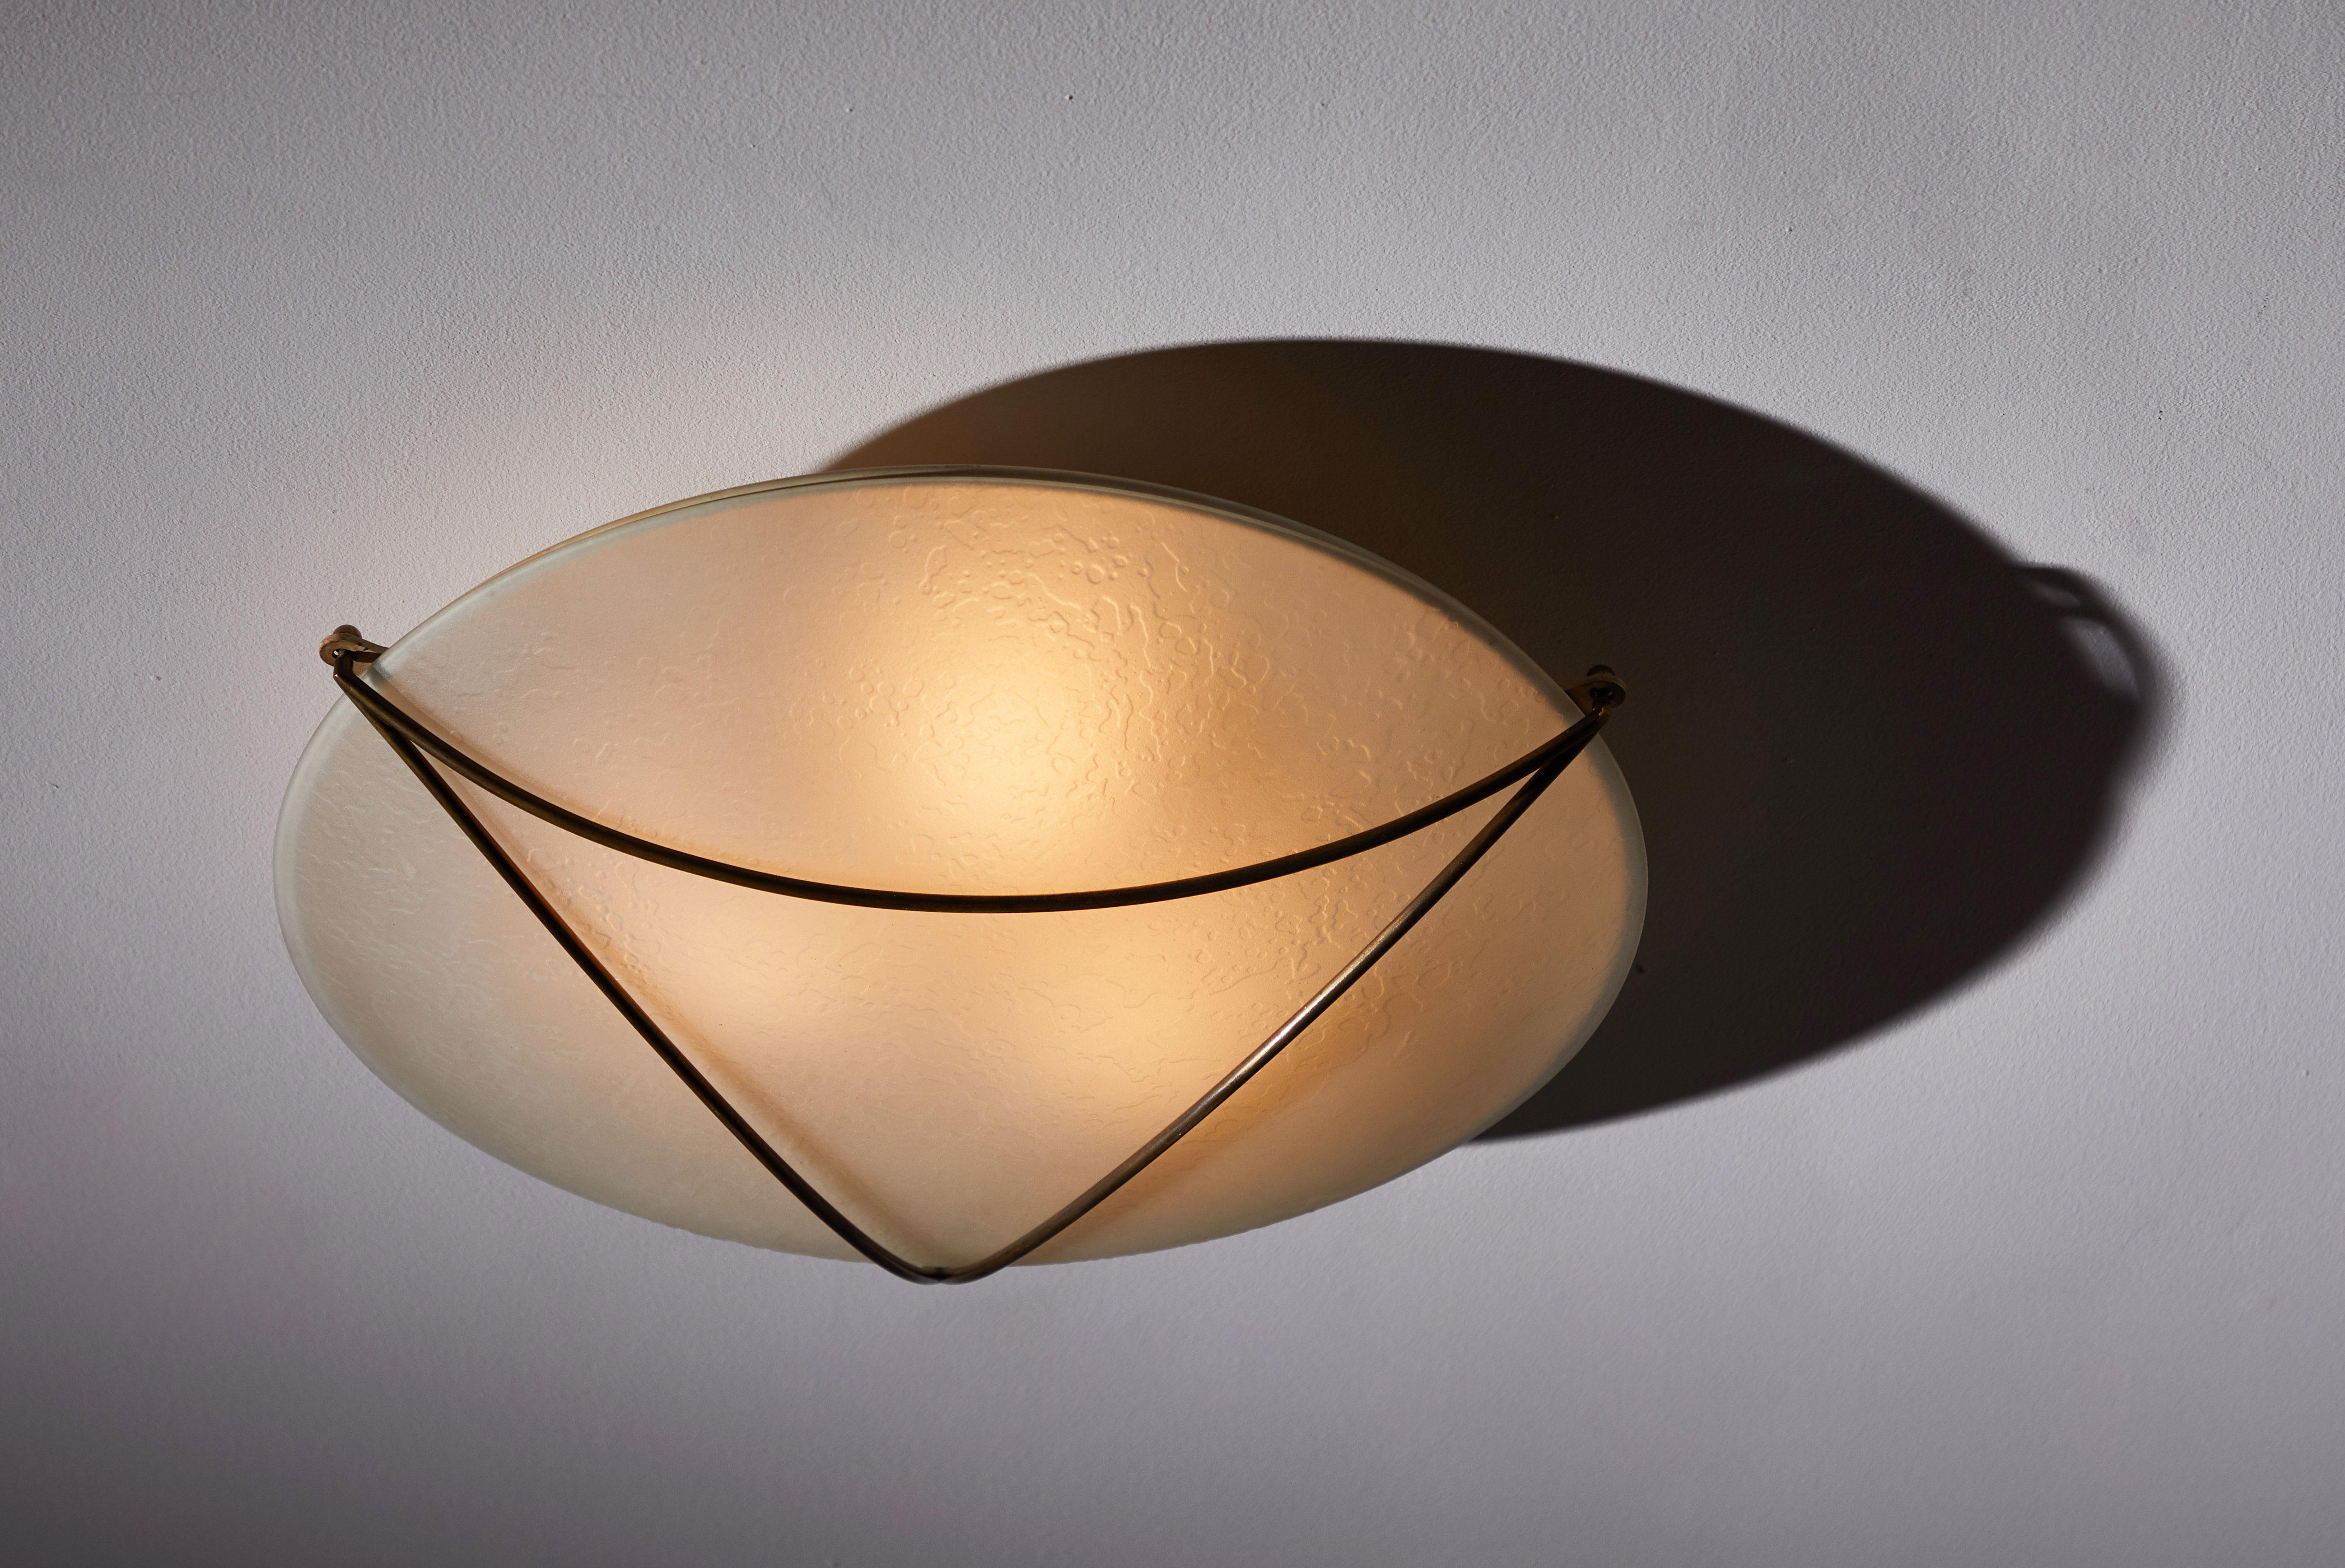 Flush mount ceiling light by Stilnovo. Manufactured in Italy circa 1950s. Opaline glass and brass. Rewired for US junction boxes. Takes three E26 25w maximum bulbs.